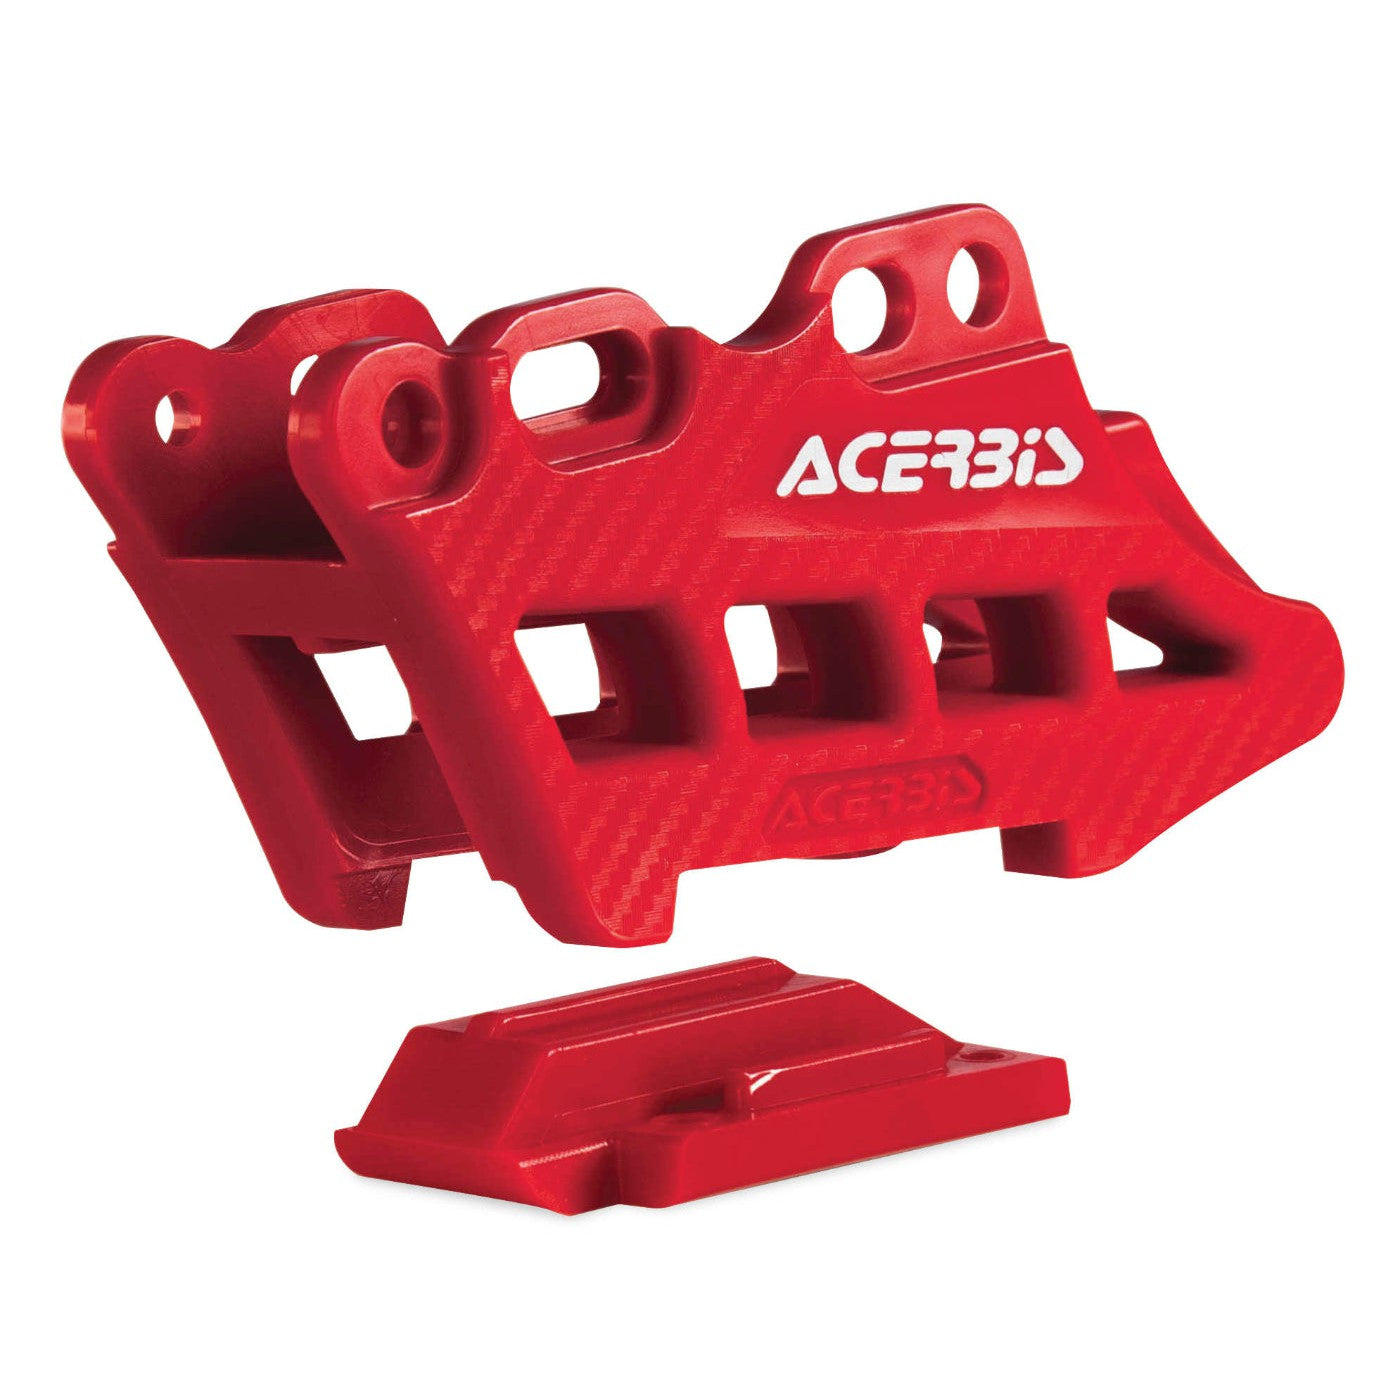 Acerbis Red 2.0 Chain Guide Block - 2410960004